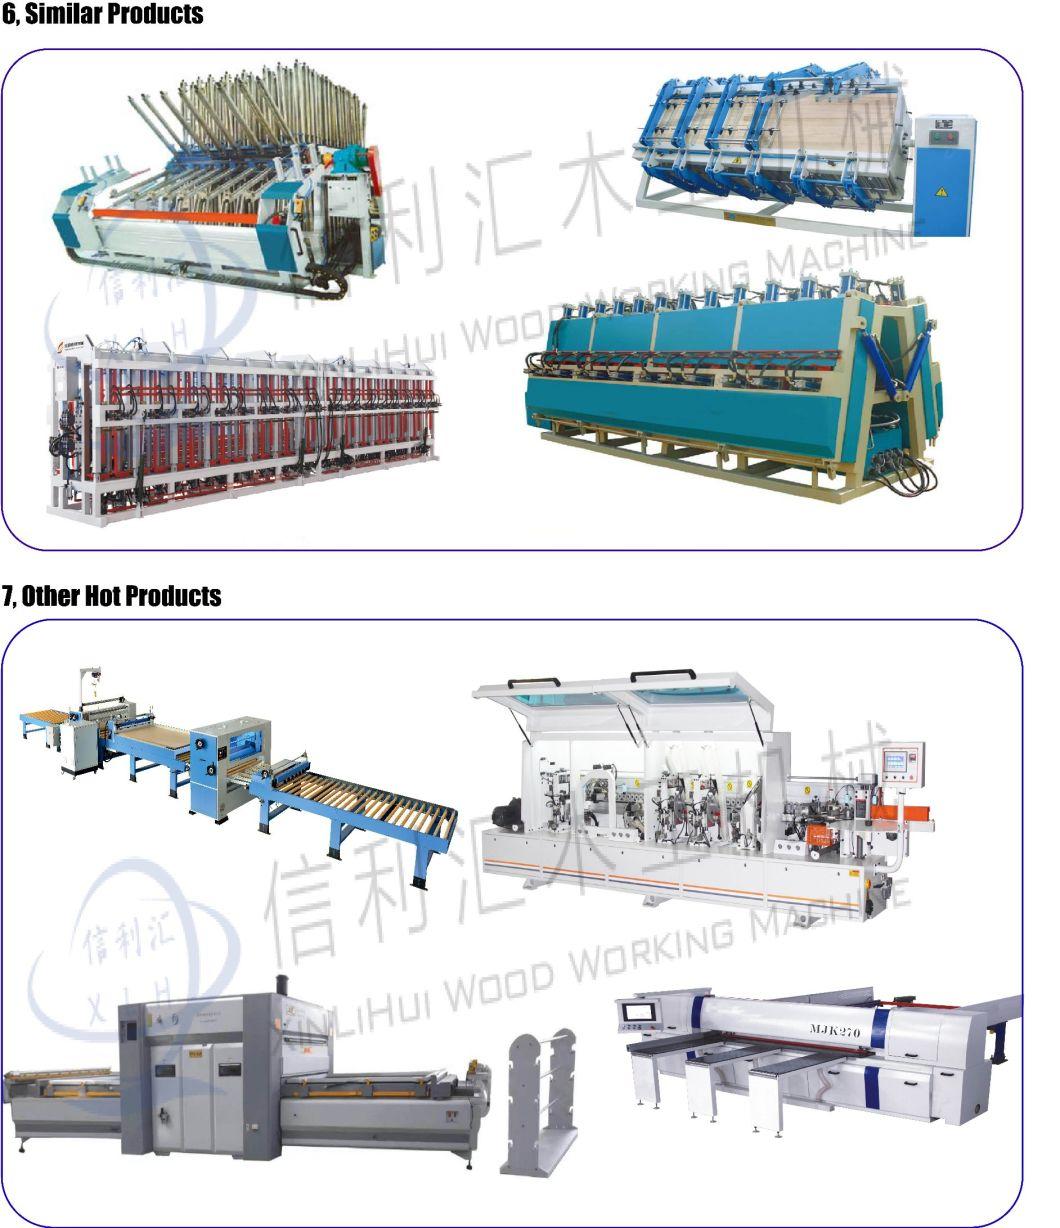 Bamboo Pole, Automatic Incense Stick Making Machine, Cutting Machine Bamboo Cutting & Incense Stick Manufacturing Unit in India. Bamboo and Wood Machinery